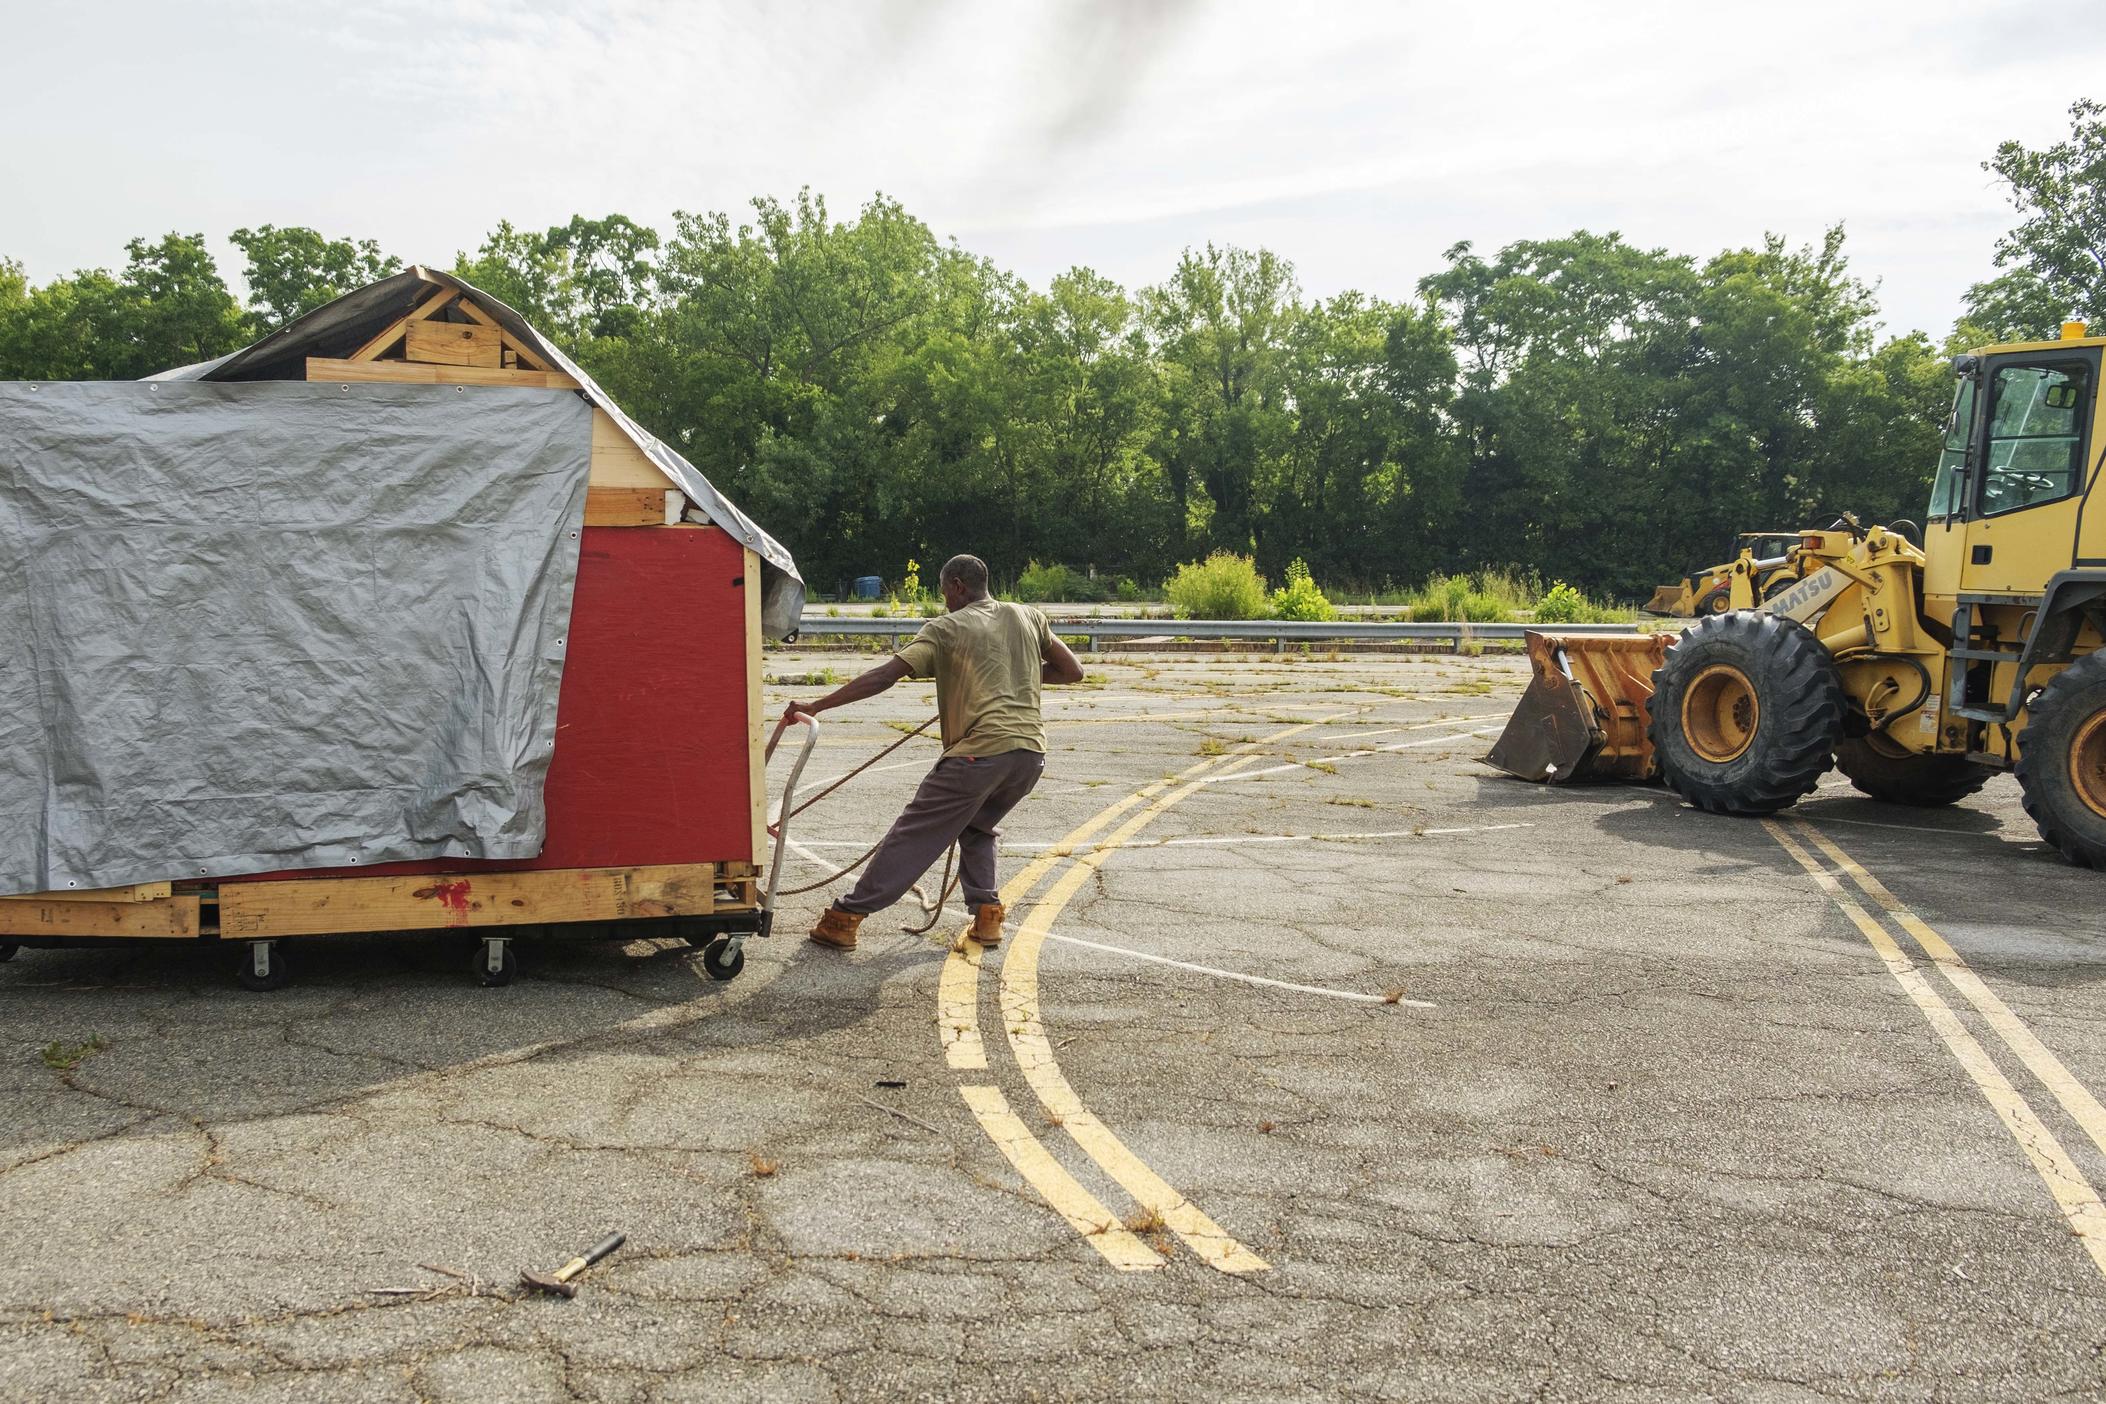 A man attempts to roll his home out of the way of a front end loader during a sweep of a homeless encampment in Macon in June of 2022.